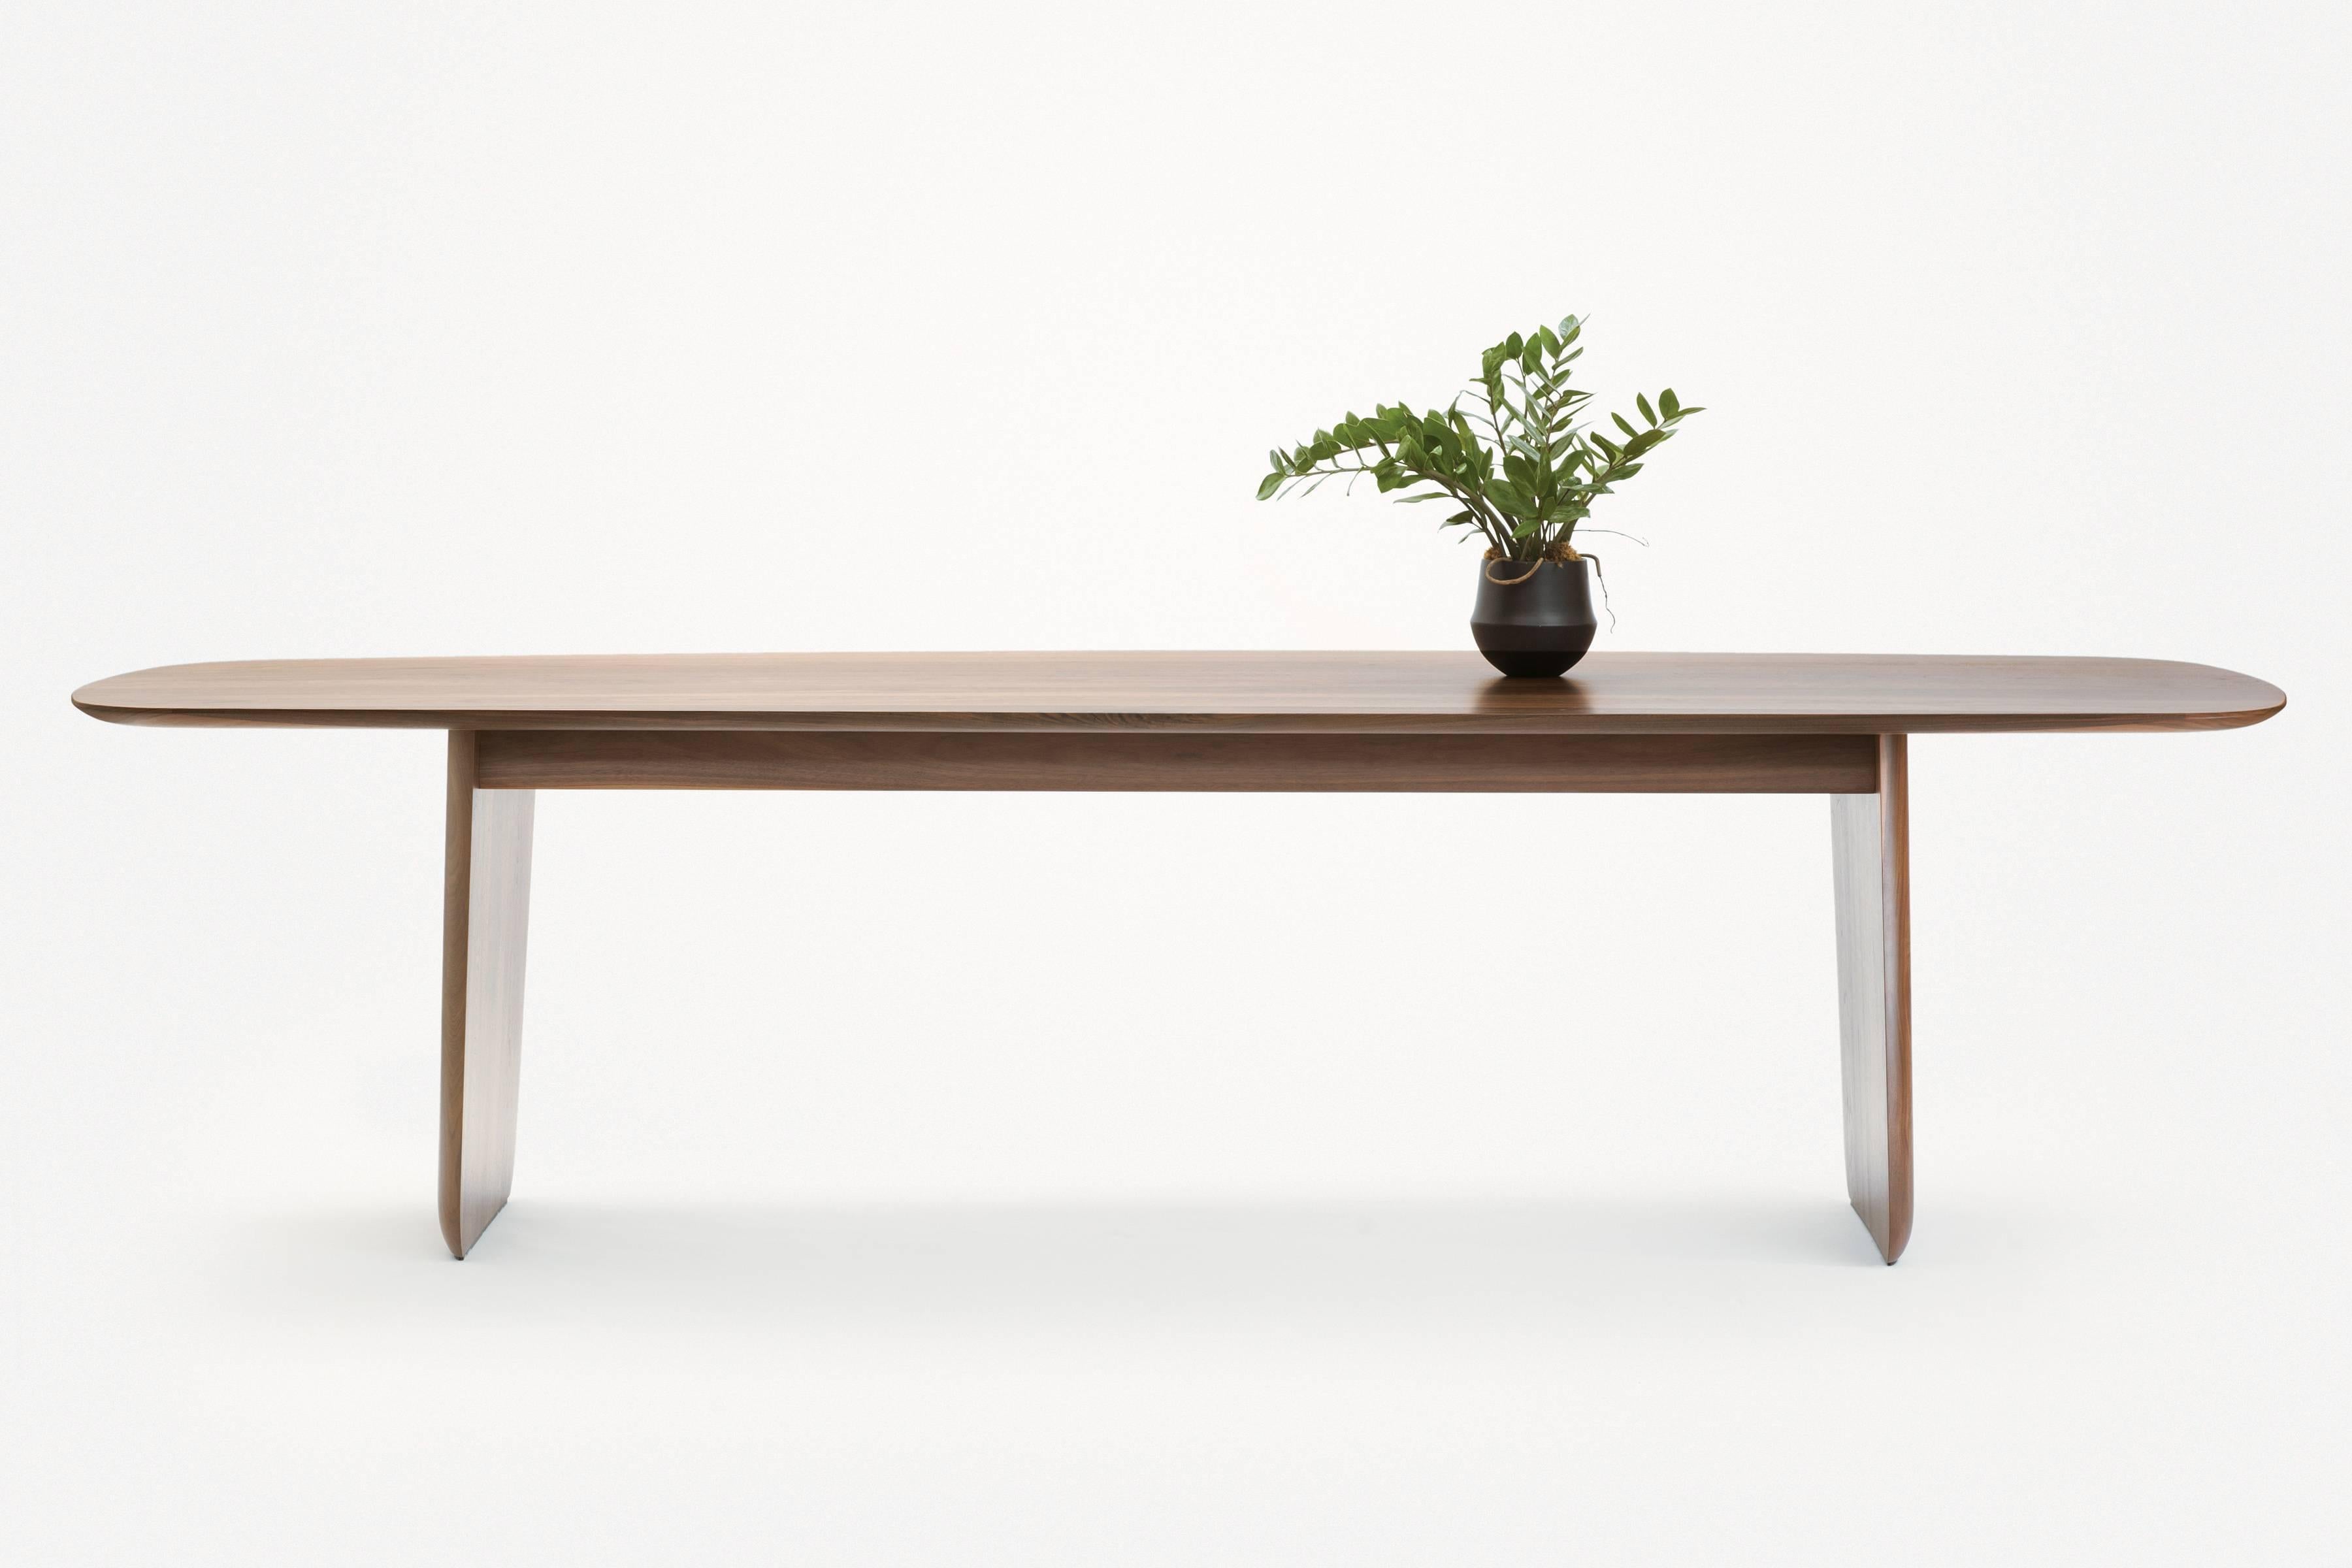 Plinth dining table, a massive solid wood table made in Pennsylvania, designed by the trio—Theo Richardson, Charles Brill and Alexander Williams.

Materials:
Solid wood.
PL-8W walnut.

Dimensions:
118 L x 39 W x 30